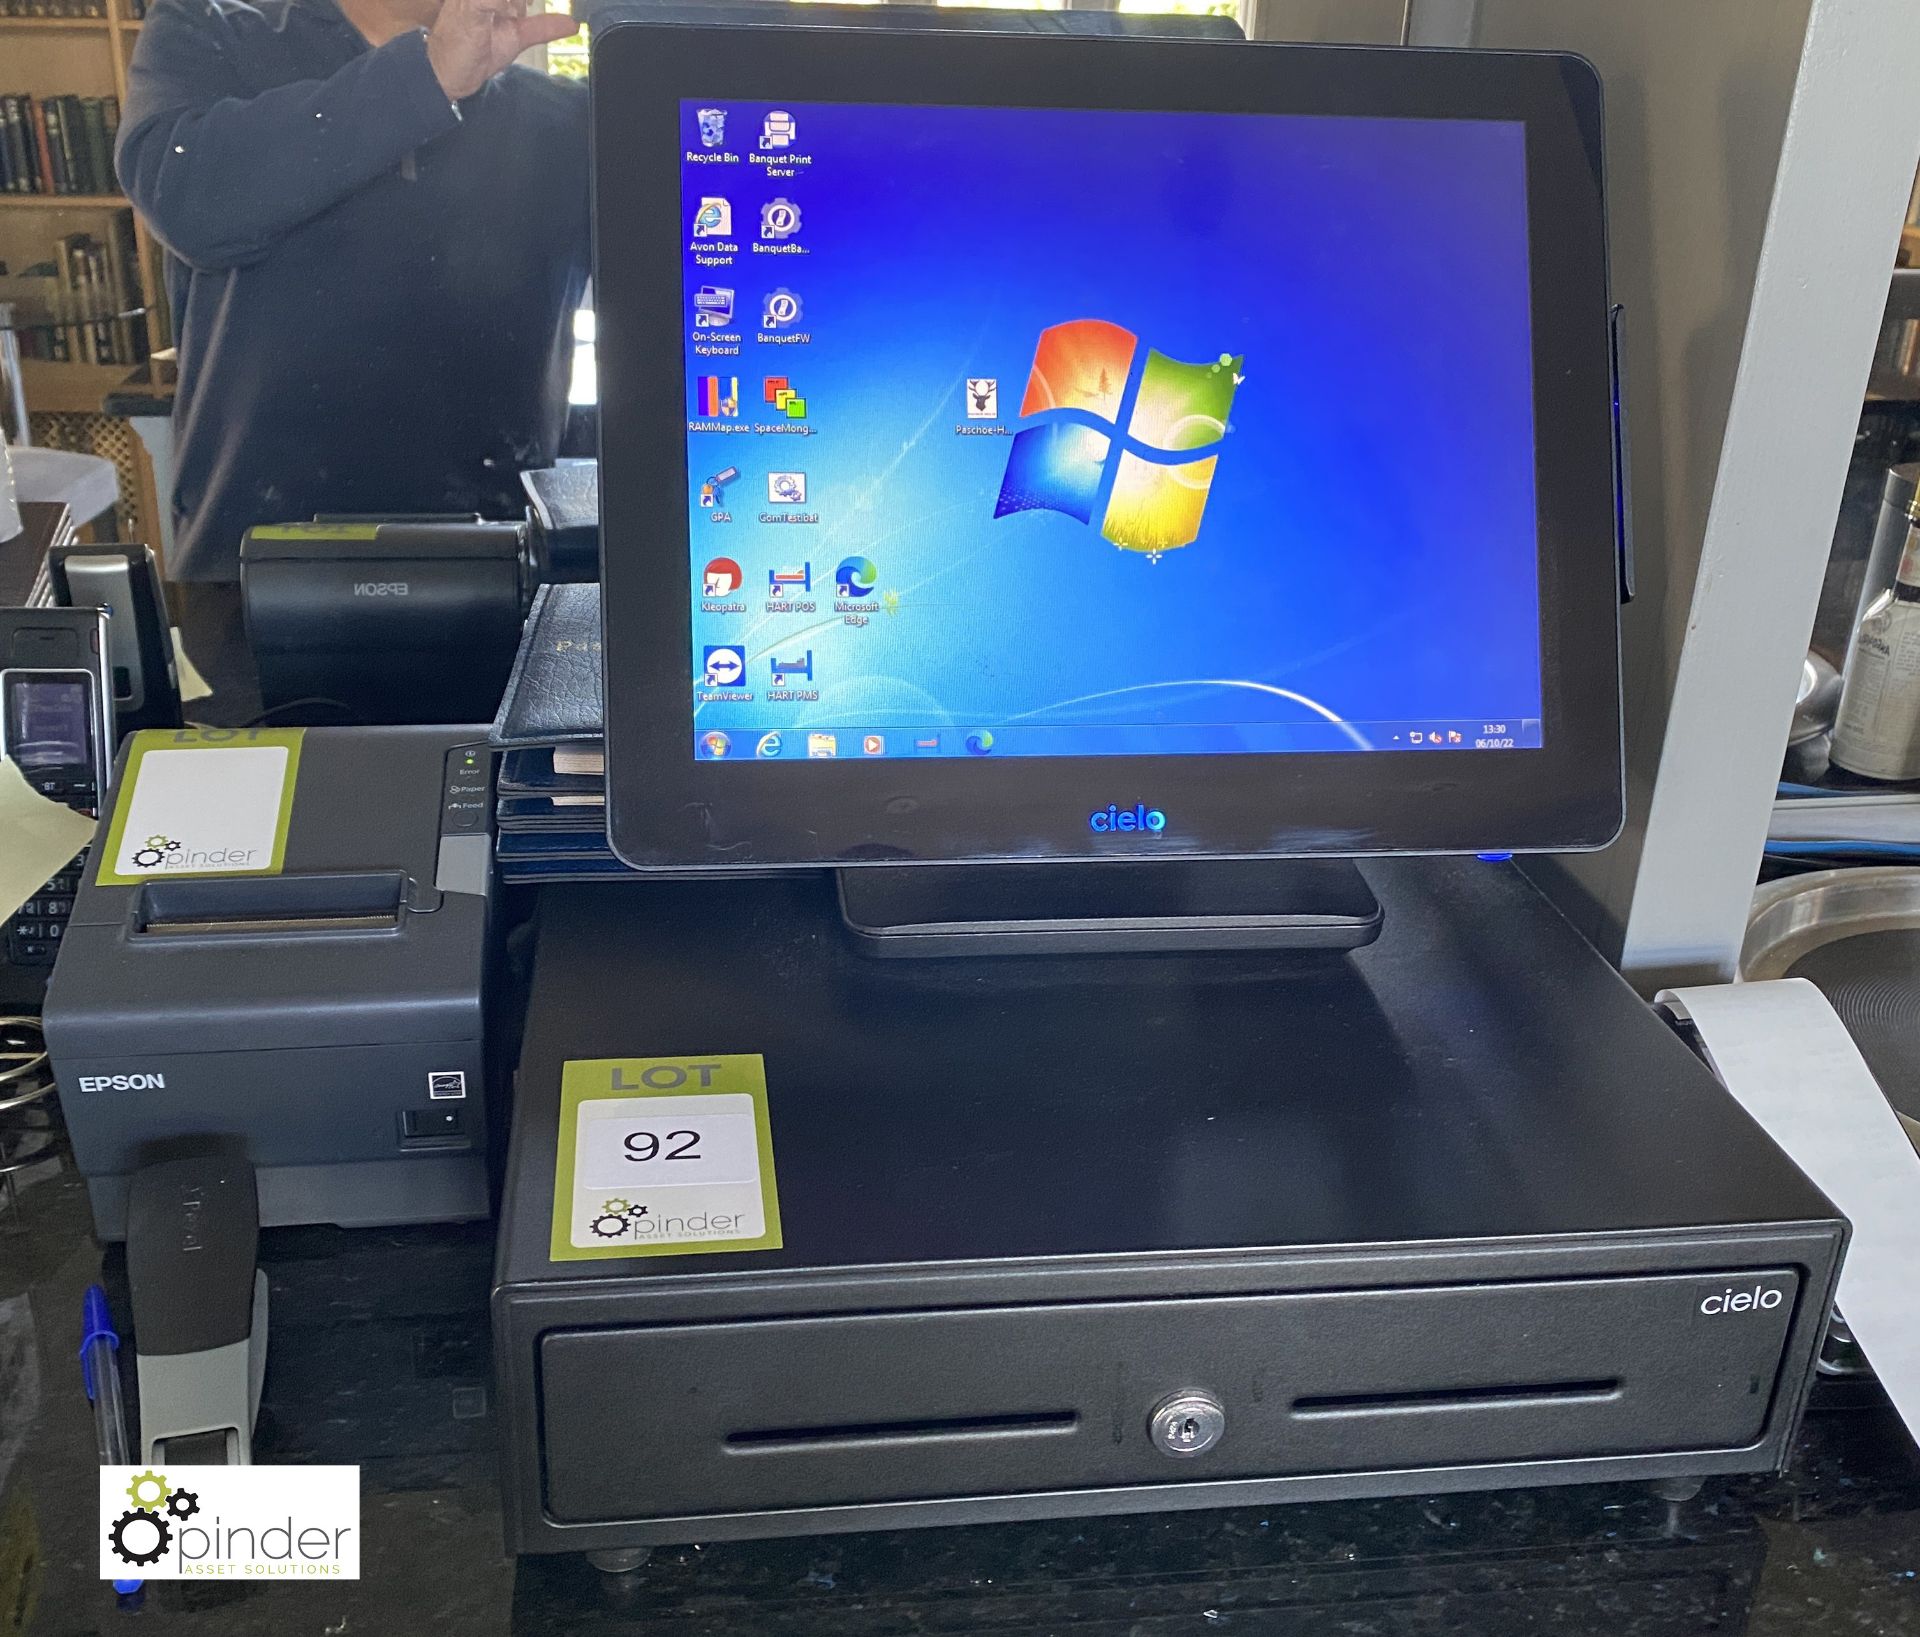 Cielo Touchscreen Cash Till, with cash drawer and Epson receipt printer